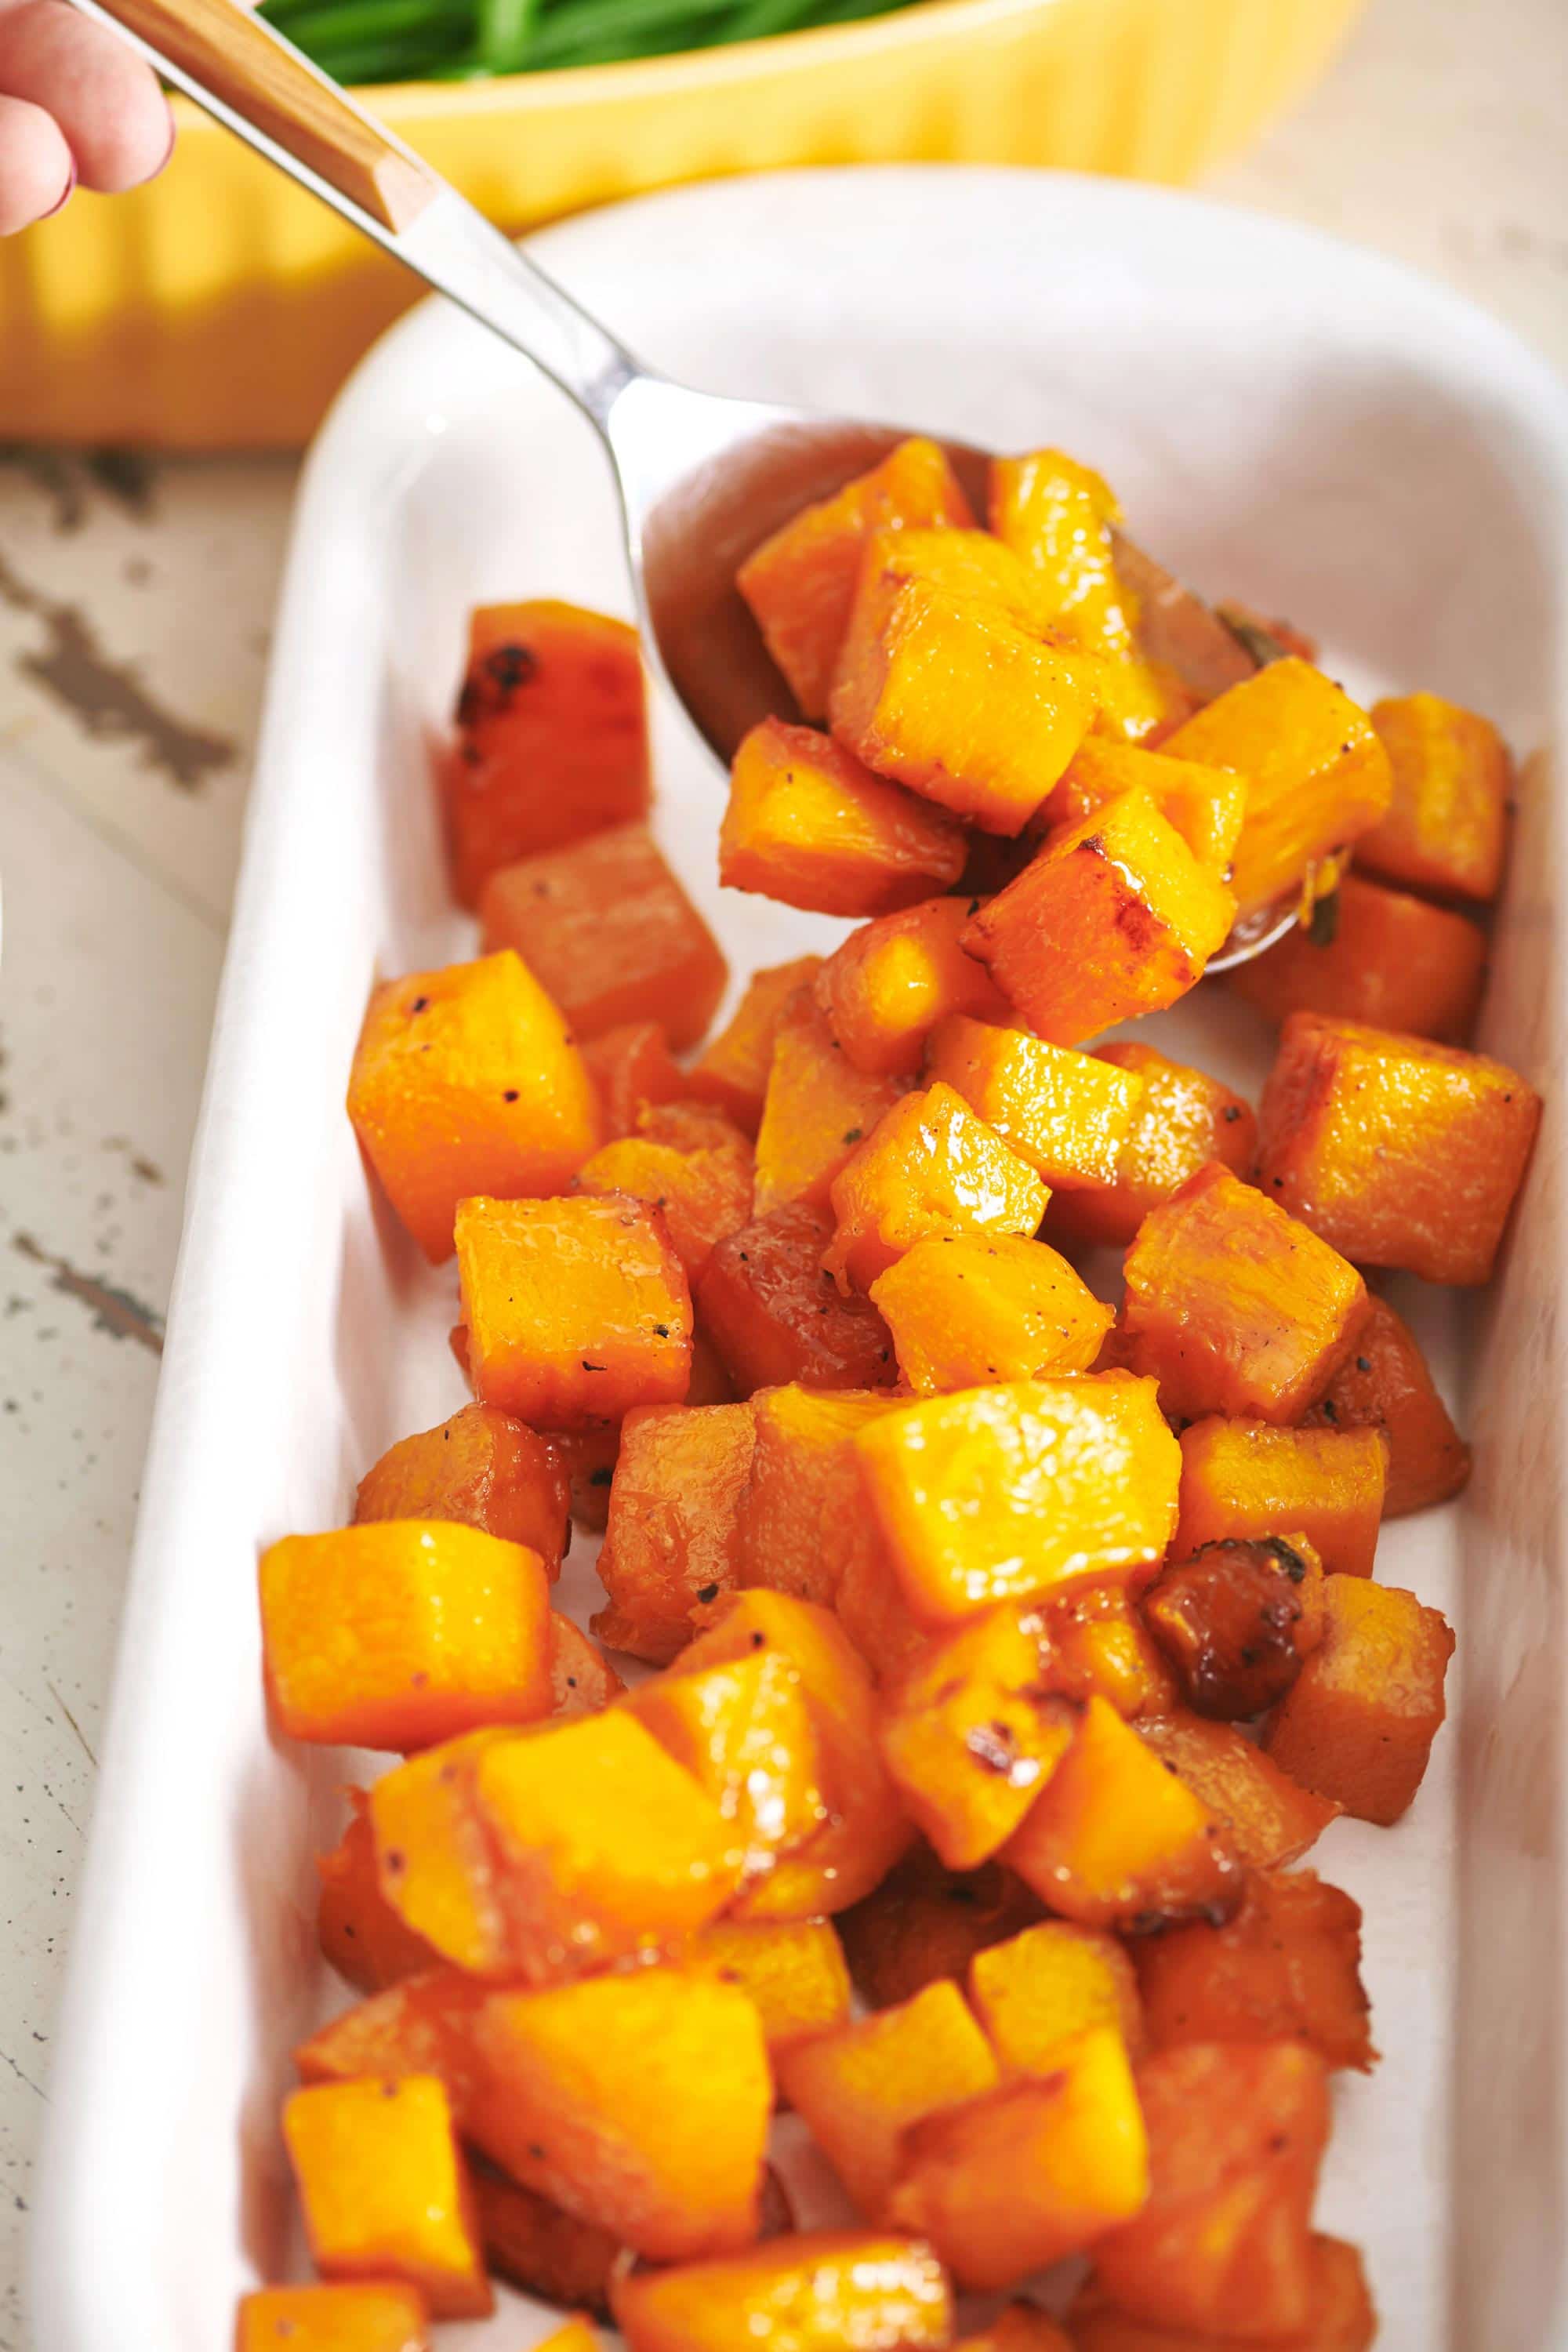 Spoon scooping Roasted Butternut Squash.